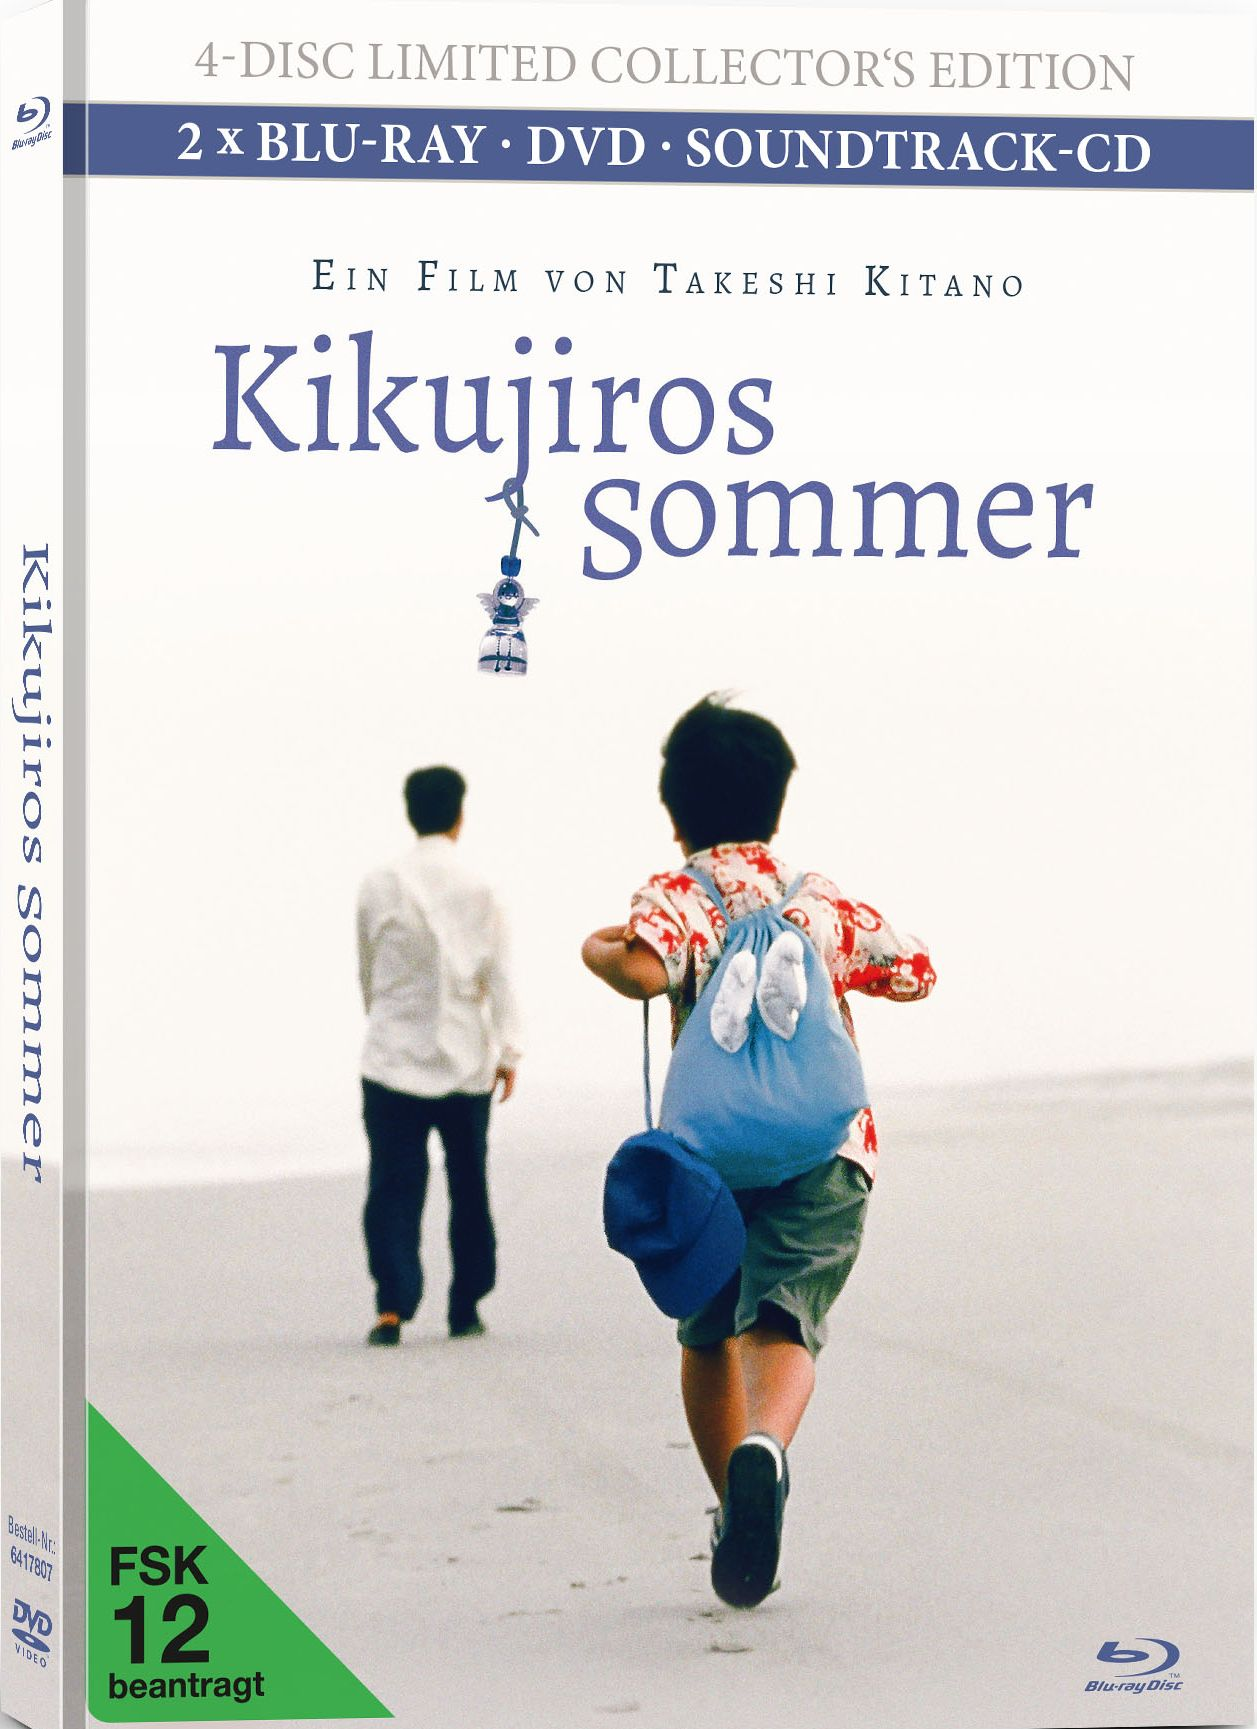 Collector’s DVD inkl. Edition Kikujiros Limited (4-Disc Soundtrack-CD) Sommer + Blu-ray